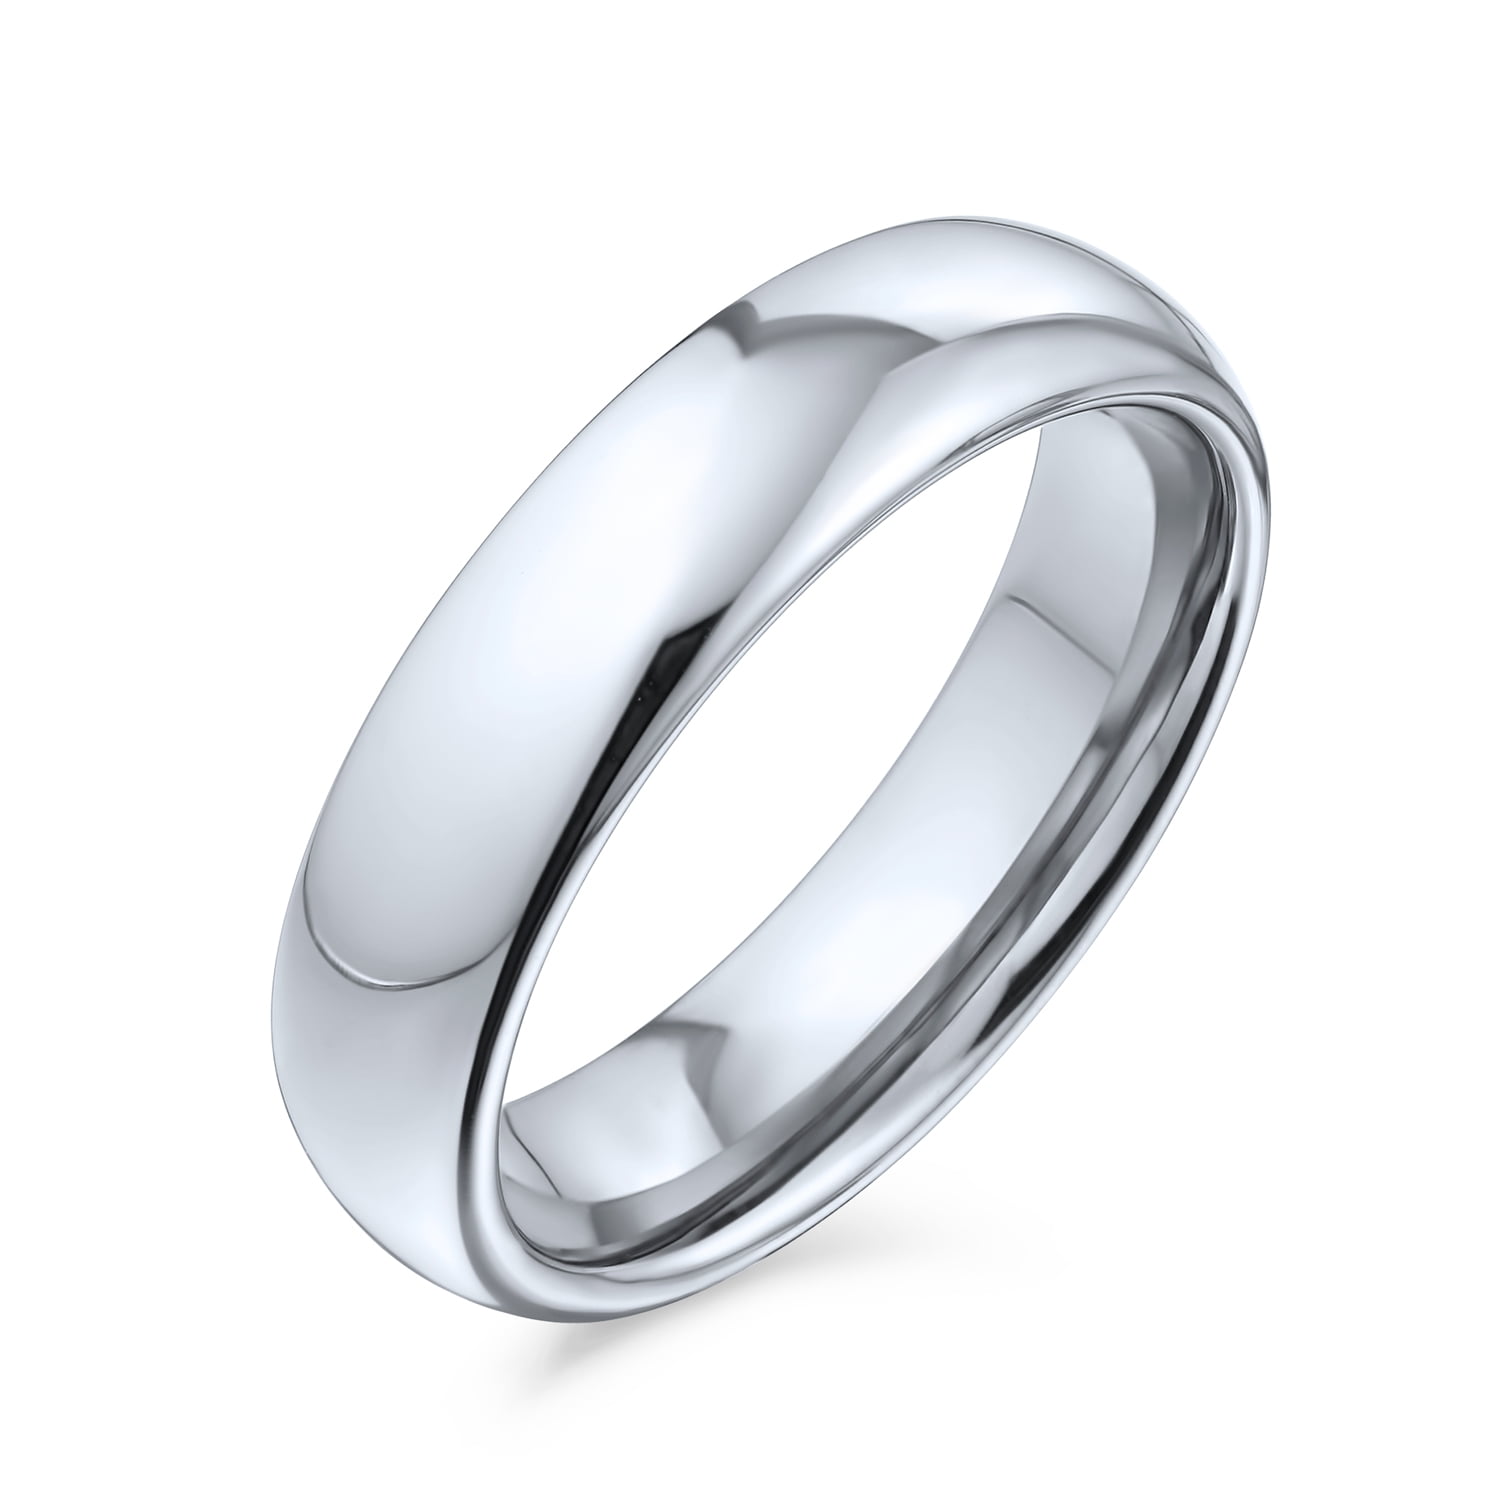 Silverly 925 Sterling Silver Rings for Men and Women - Braided Ring 7.7 mm  - Wide Band Men's